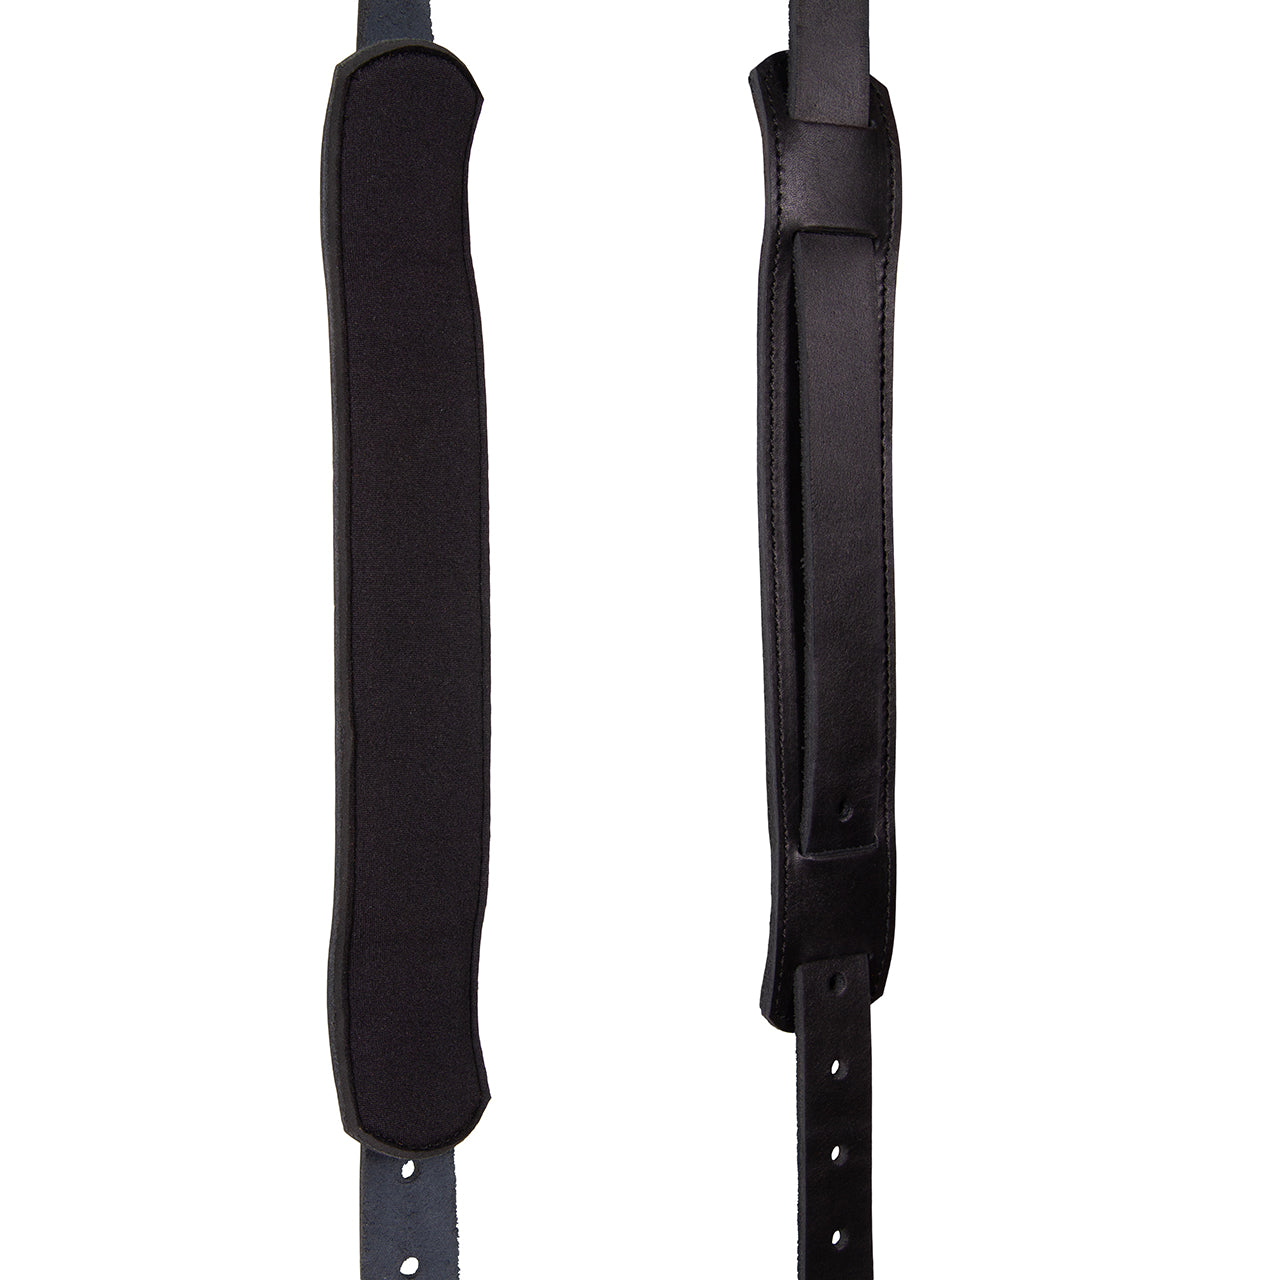 Leather Stronghold Suspension System, Comfortable Padded and Fully-Adjustable Padded Leather Tool Belt Suspenders.